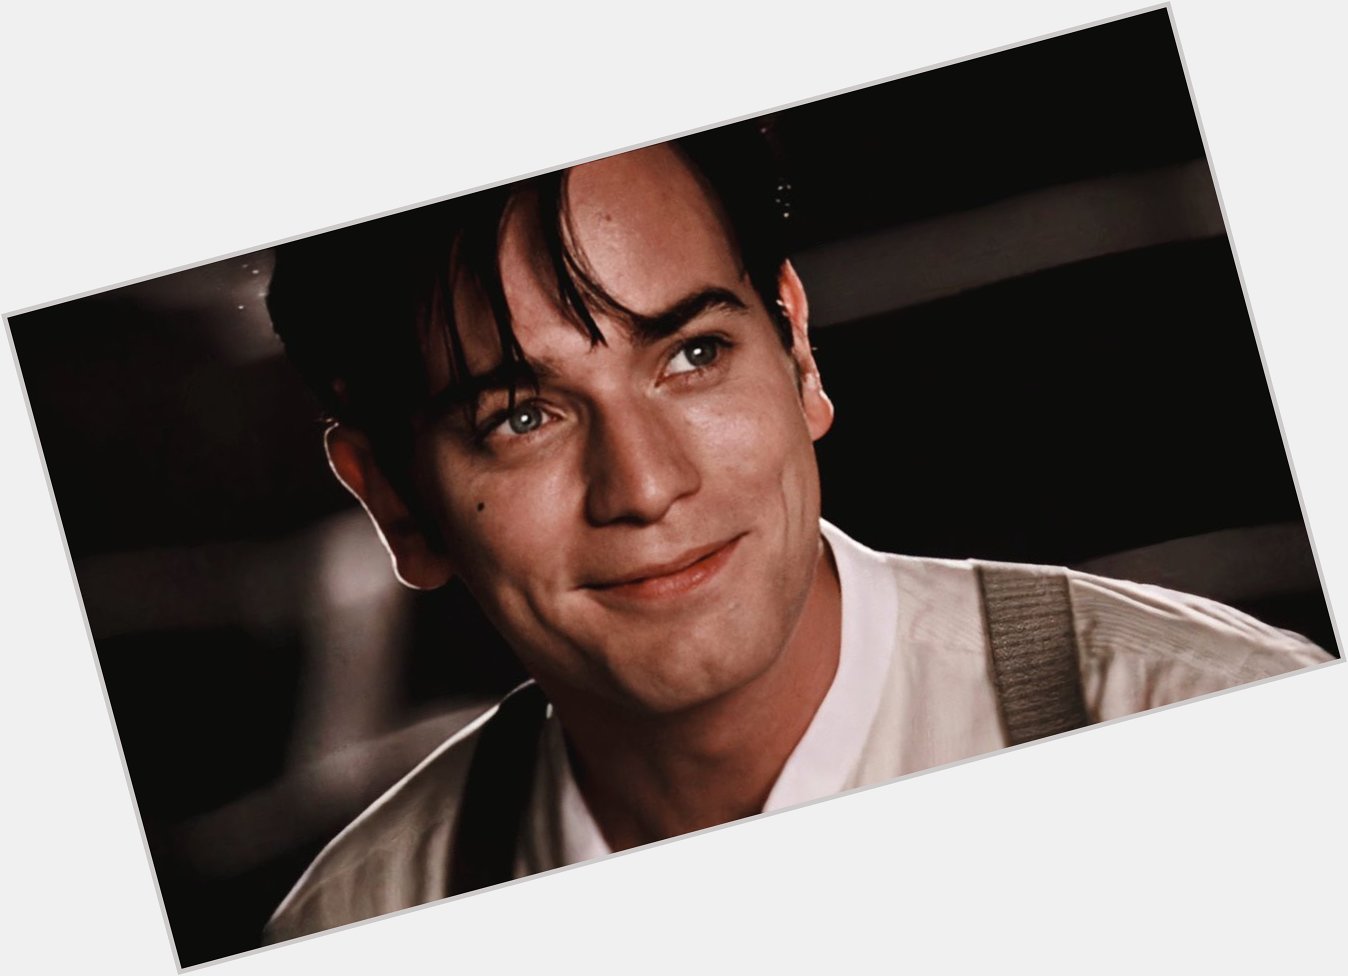 Happy birthday to the amazing Ewan McGregor, who deserved an Oscar nomination for Moulin Rouge! 